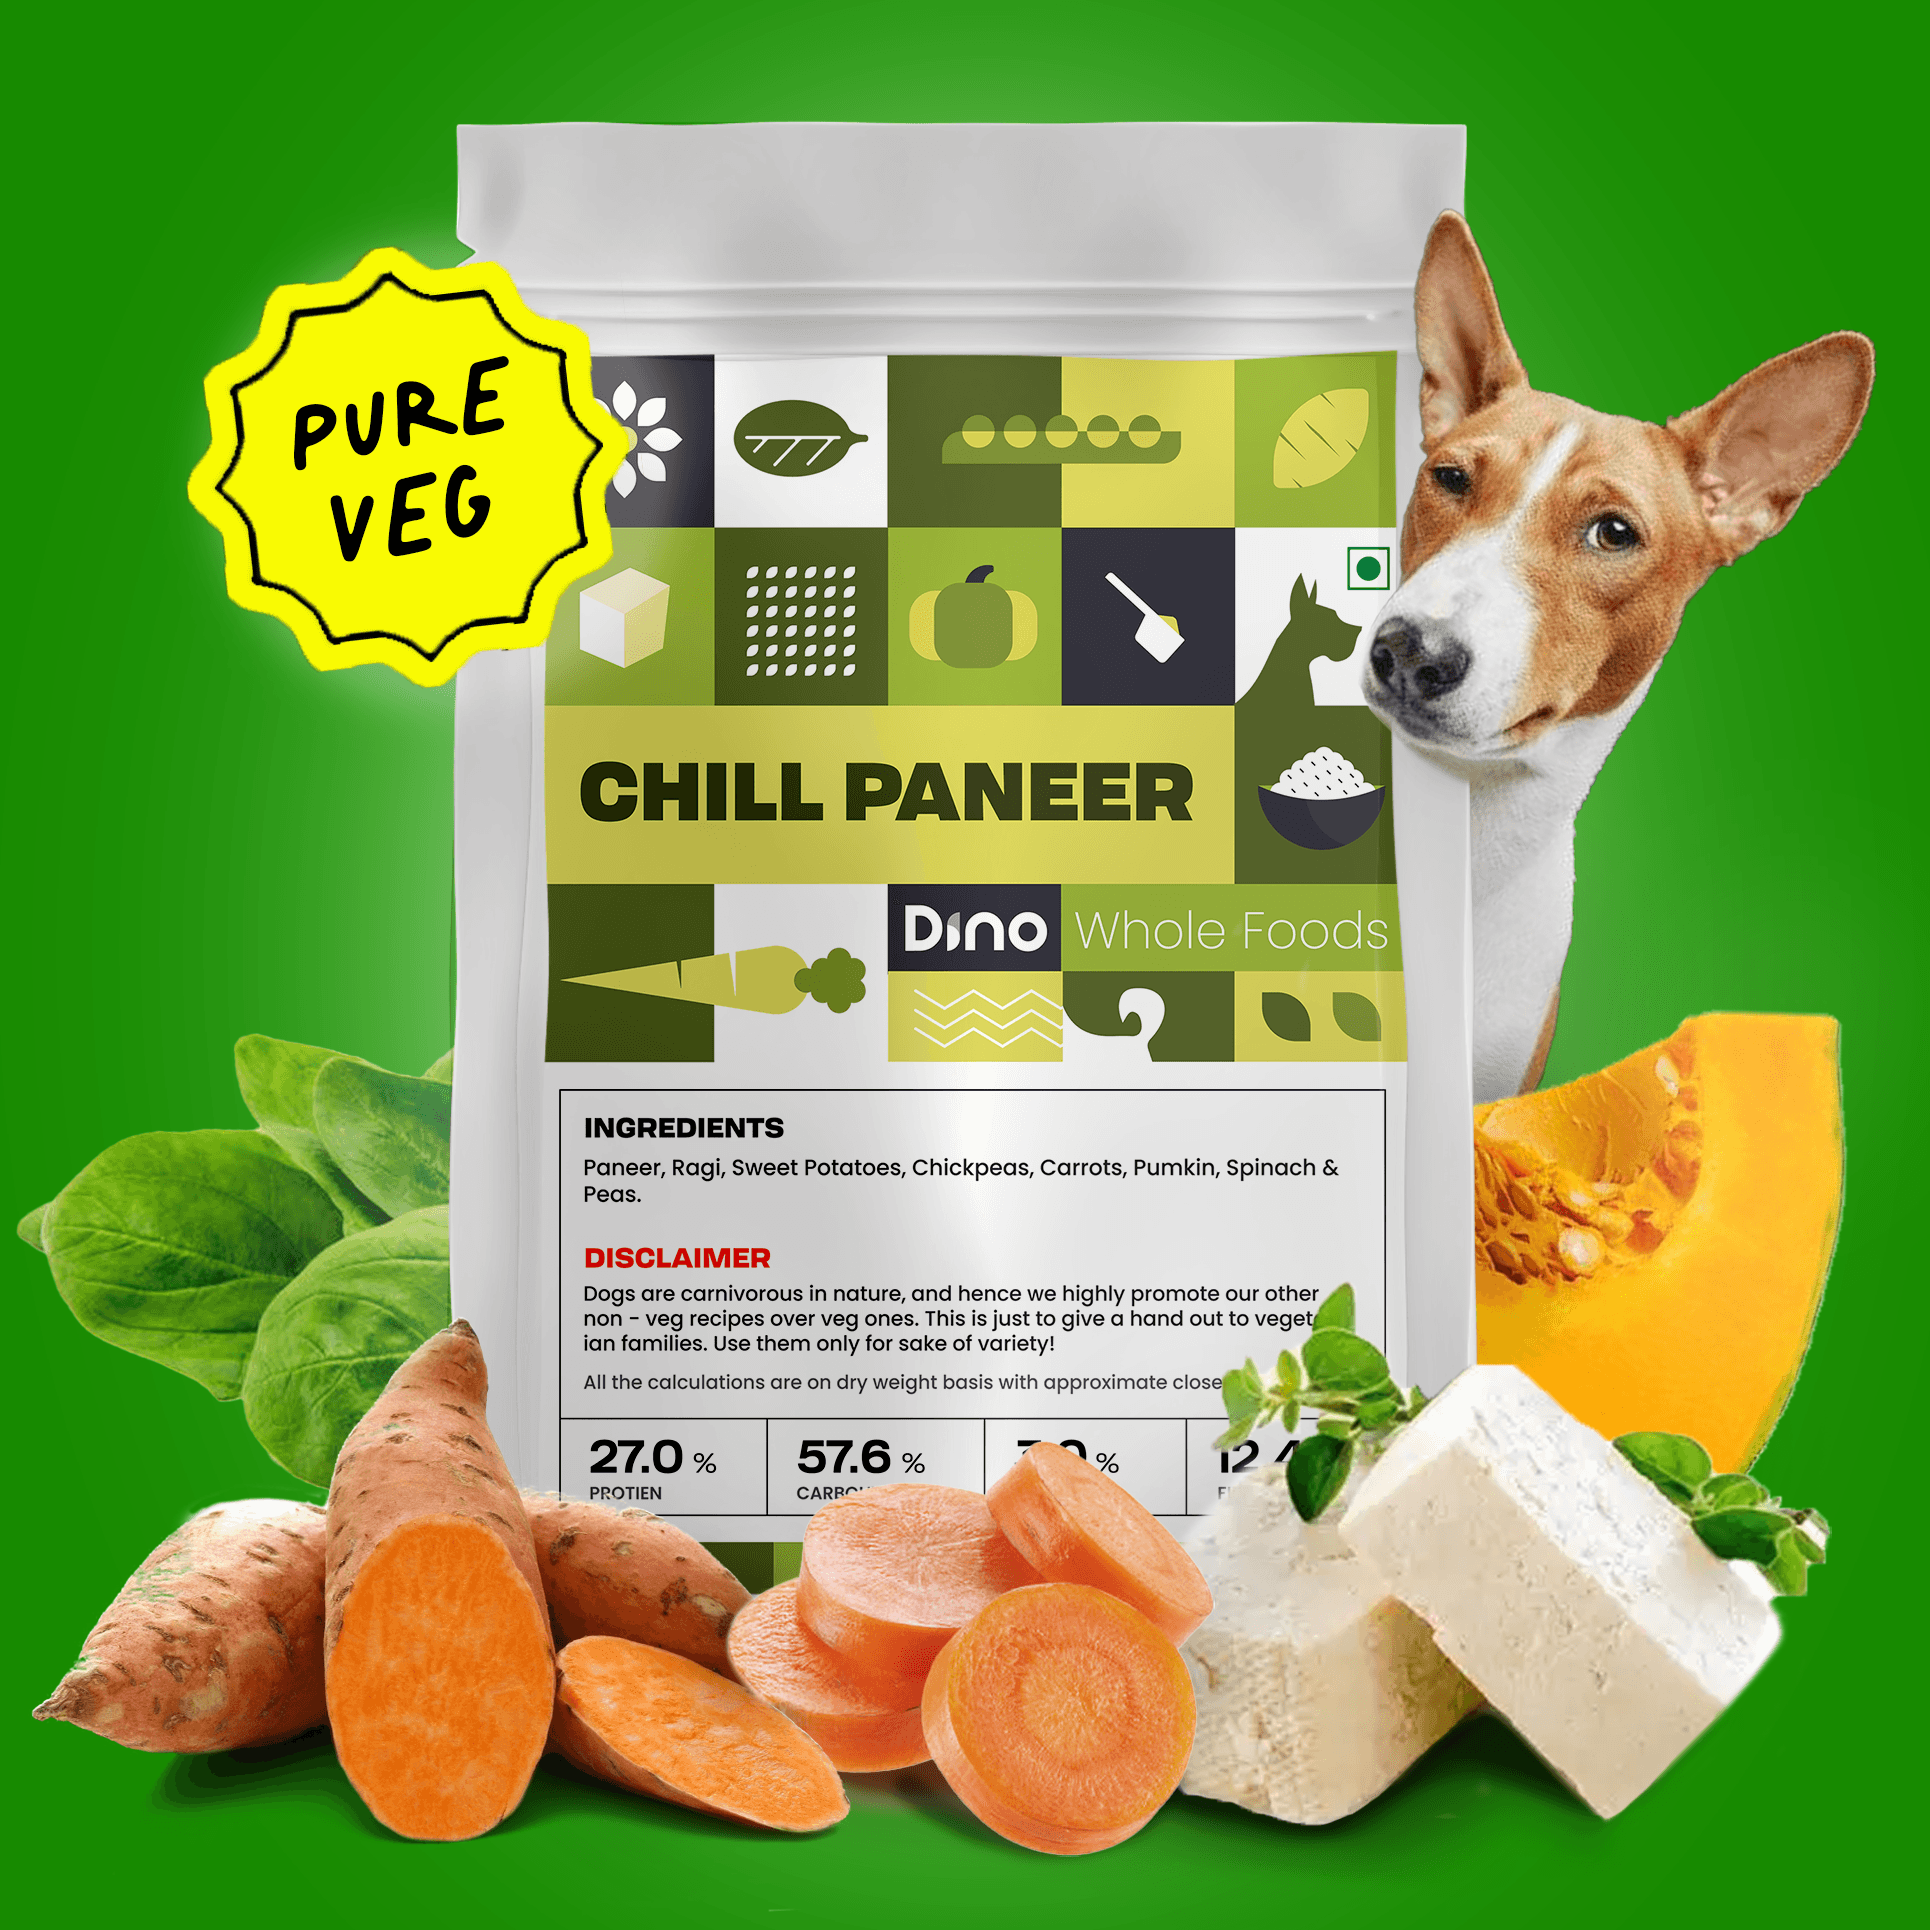 Chill Paneer - Complete Balanced dog food meals for fussy eaters and sensitive stomachs